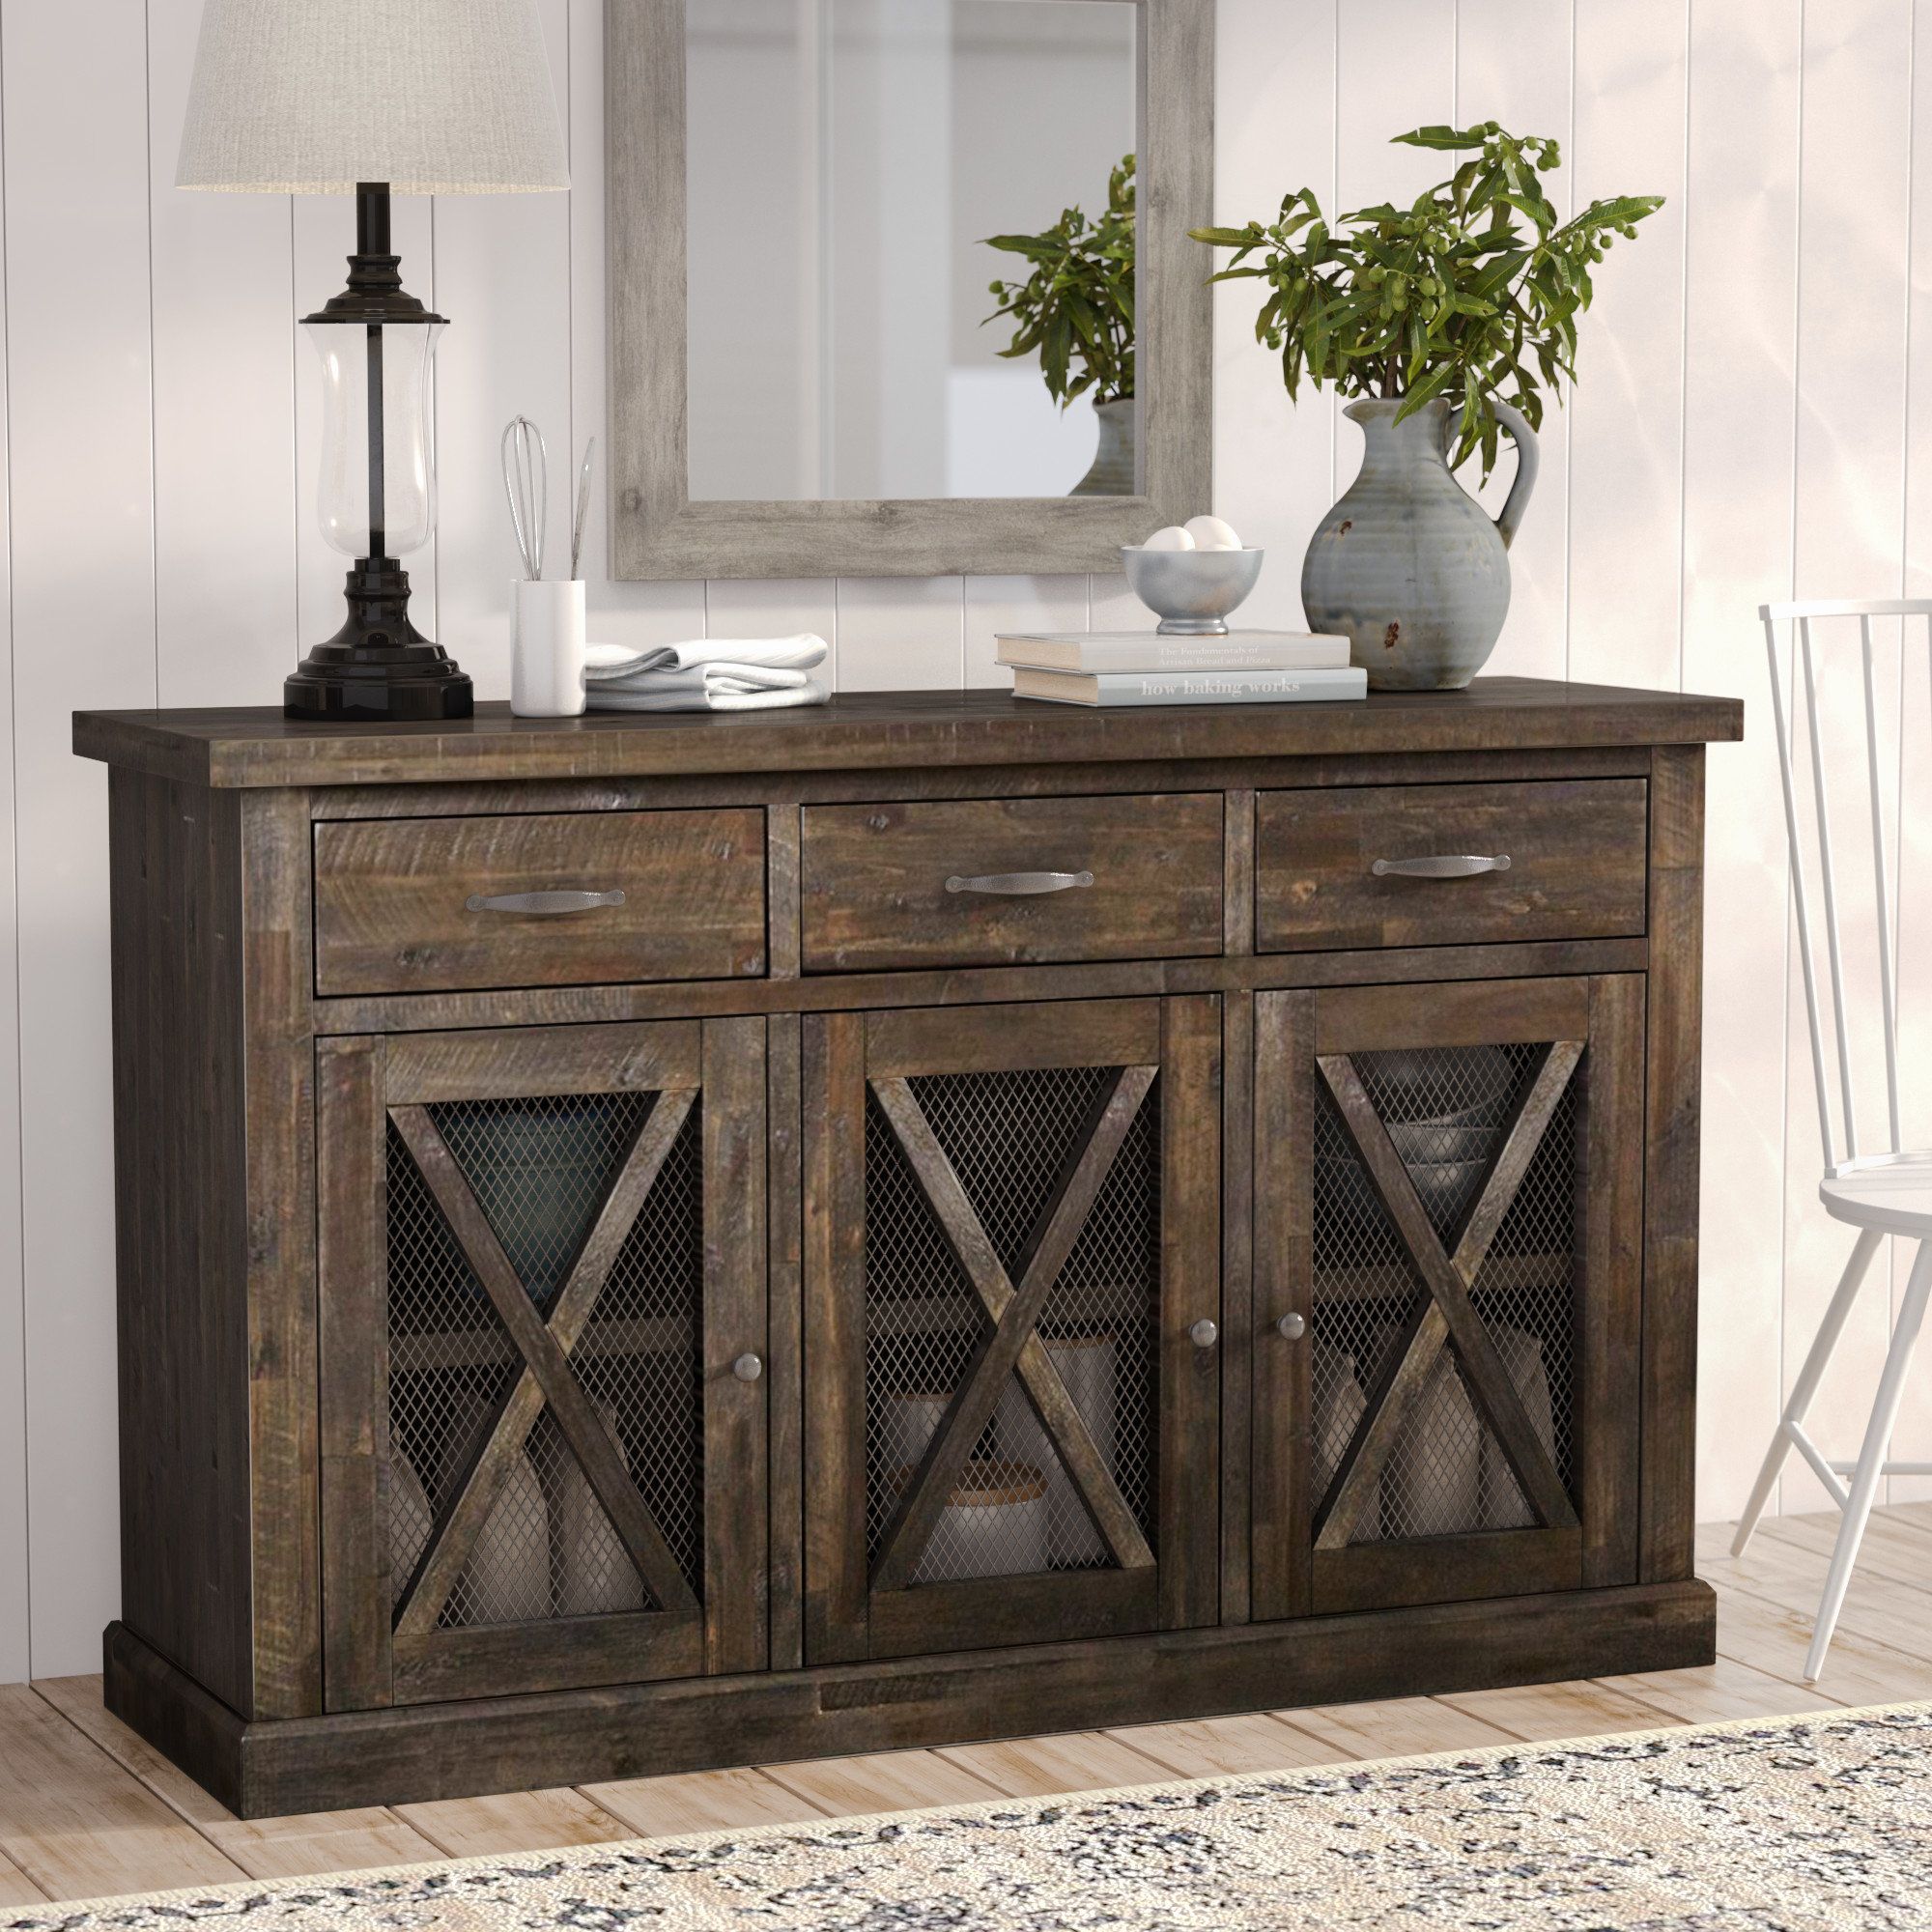 Colborne Sideboard Throughout 2018 Velazco Sideboards (View 5 of 20)